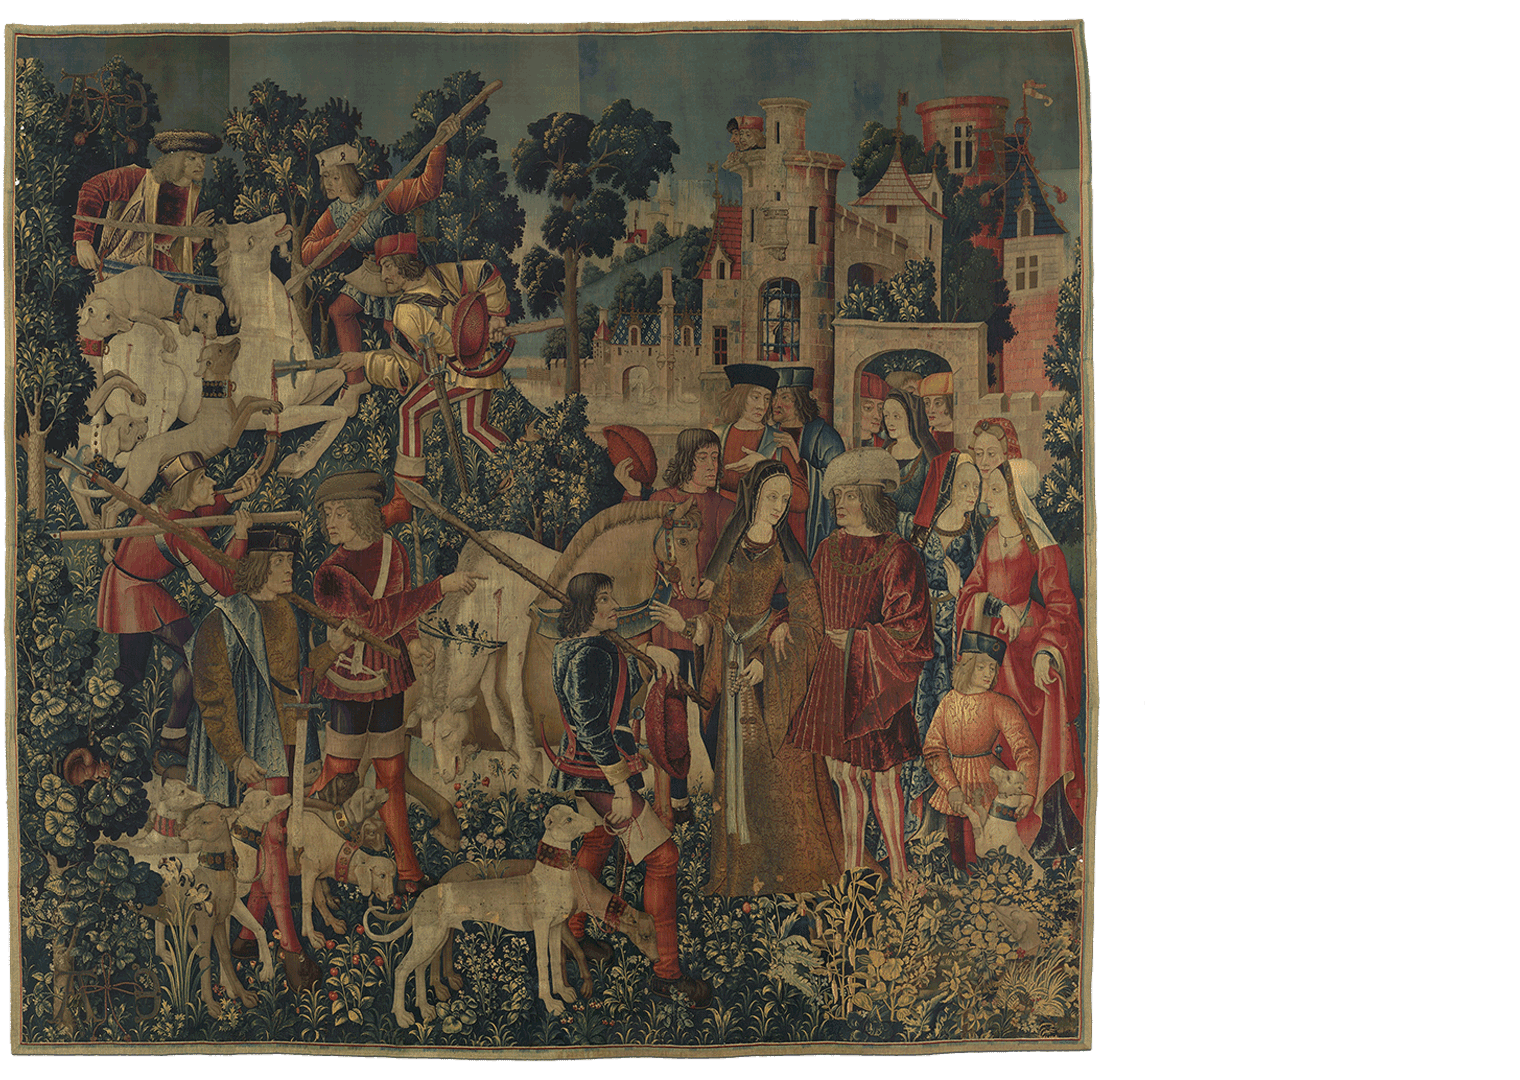 In the final Unicorn Tapestry, the hunting party returns to the castle with the unicorn, their prey. On the left, hunters stab one unicorn, and in the center a second is draped over a horse. Nobles gather around the animal to gawk and point. In the distance, the castle rises over the forest.